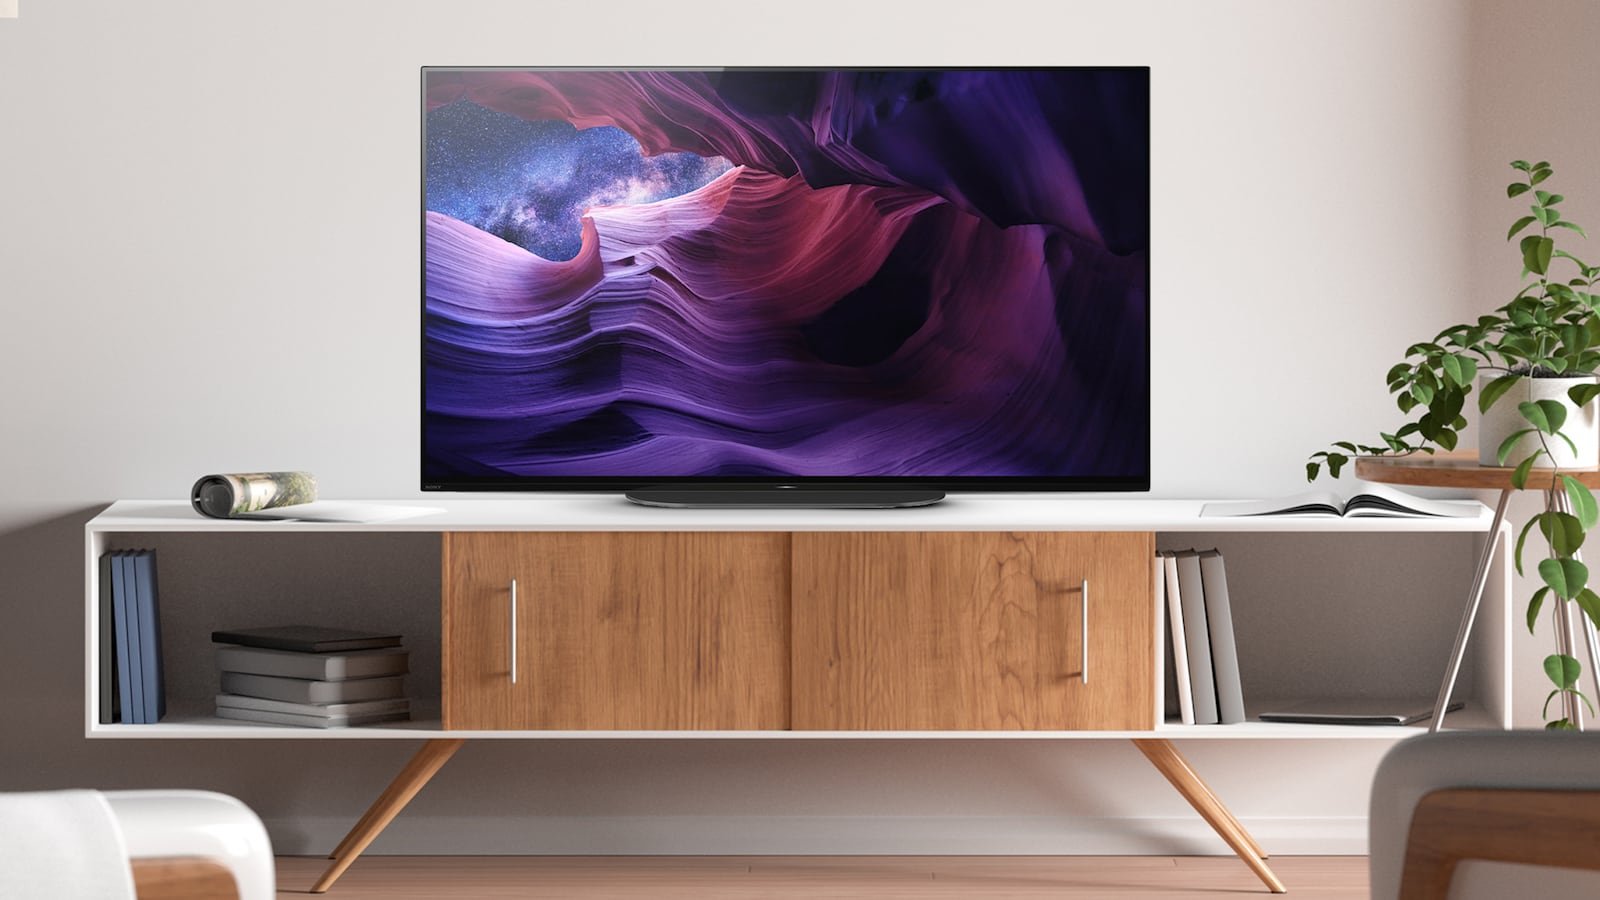 Sony A9S 4K OLED TV comes in only a 48-inch size